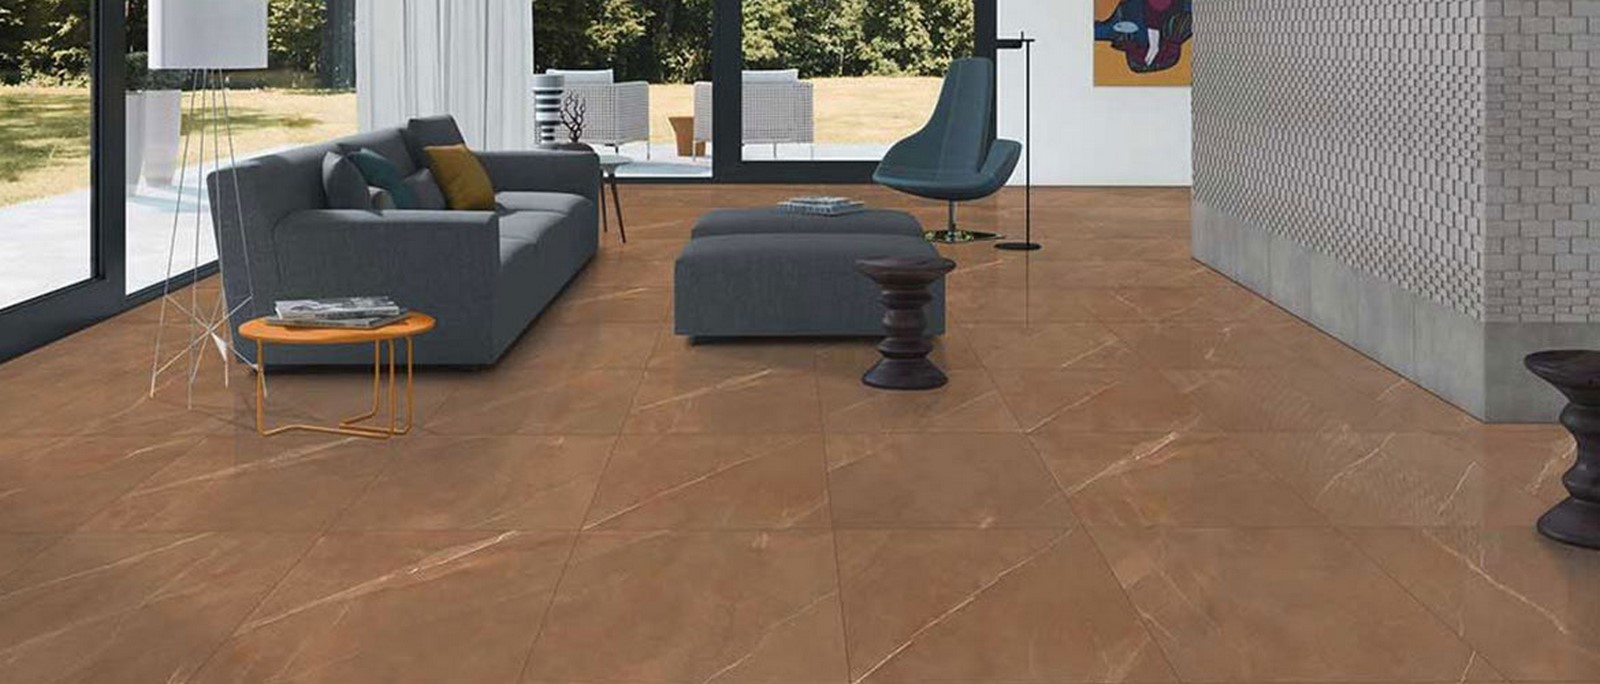 20 Best Vitrified Tiles with Price in India  - Sheet17